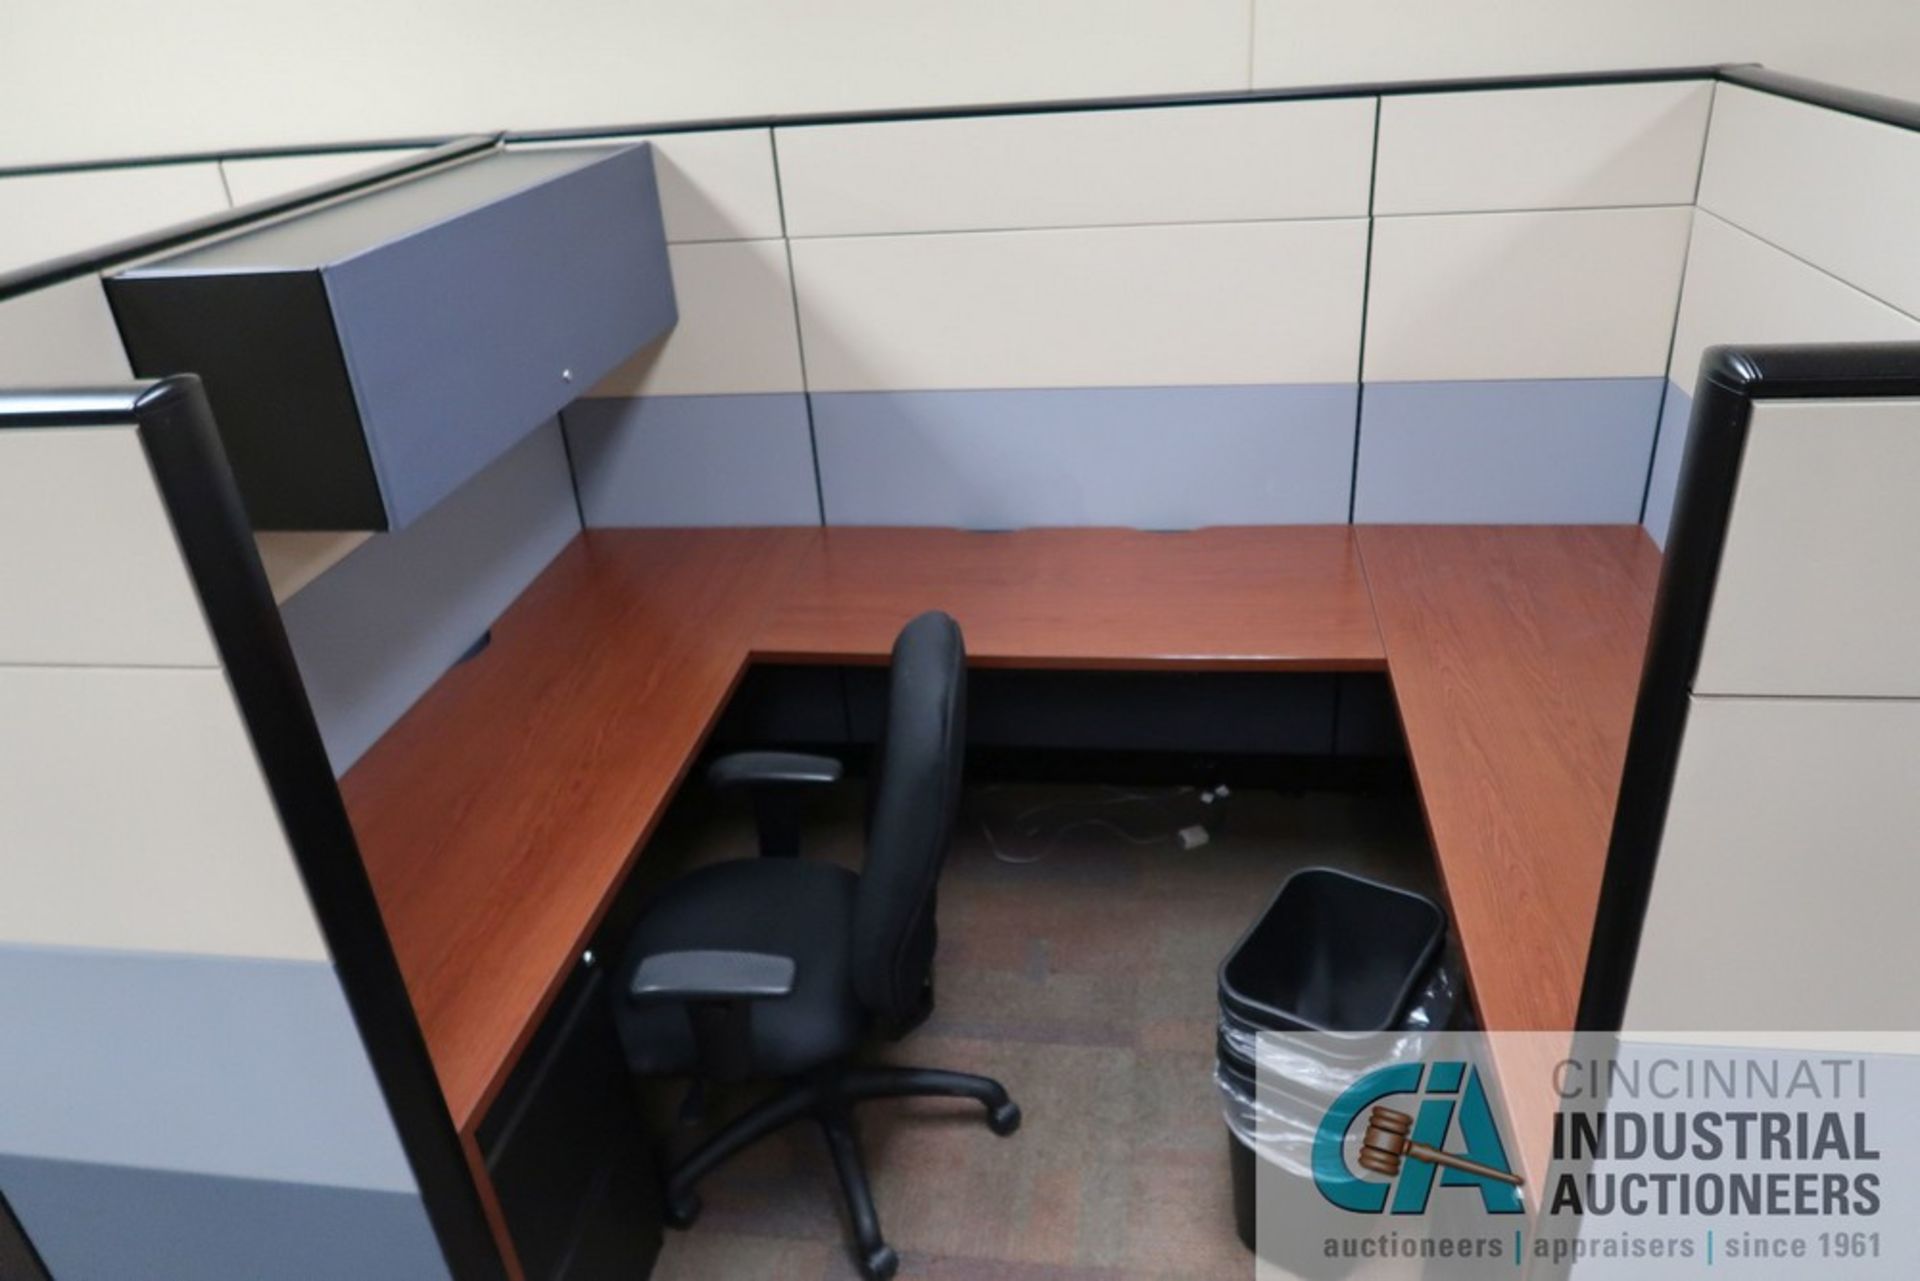 PERSON 100" X 76" MODULAR OFFICE CUBICLES WITH (6) CHAIRS - Image 2 of 4